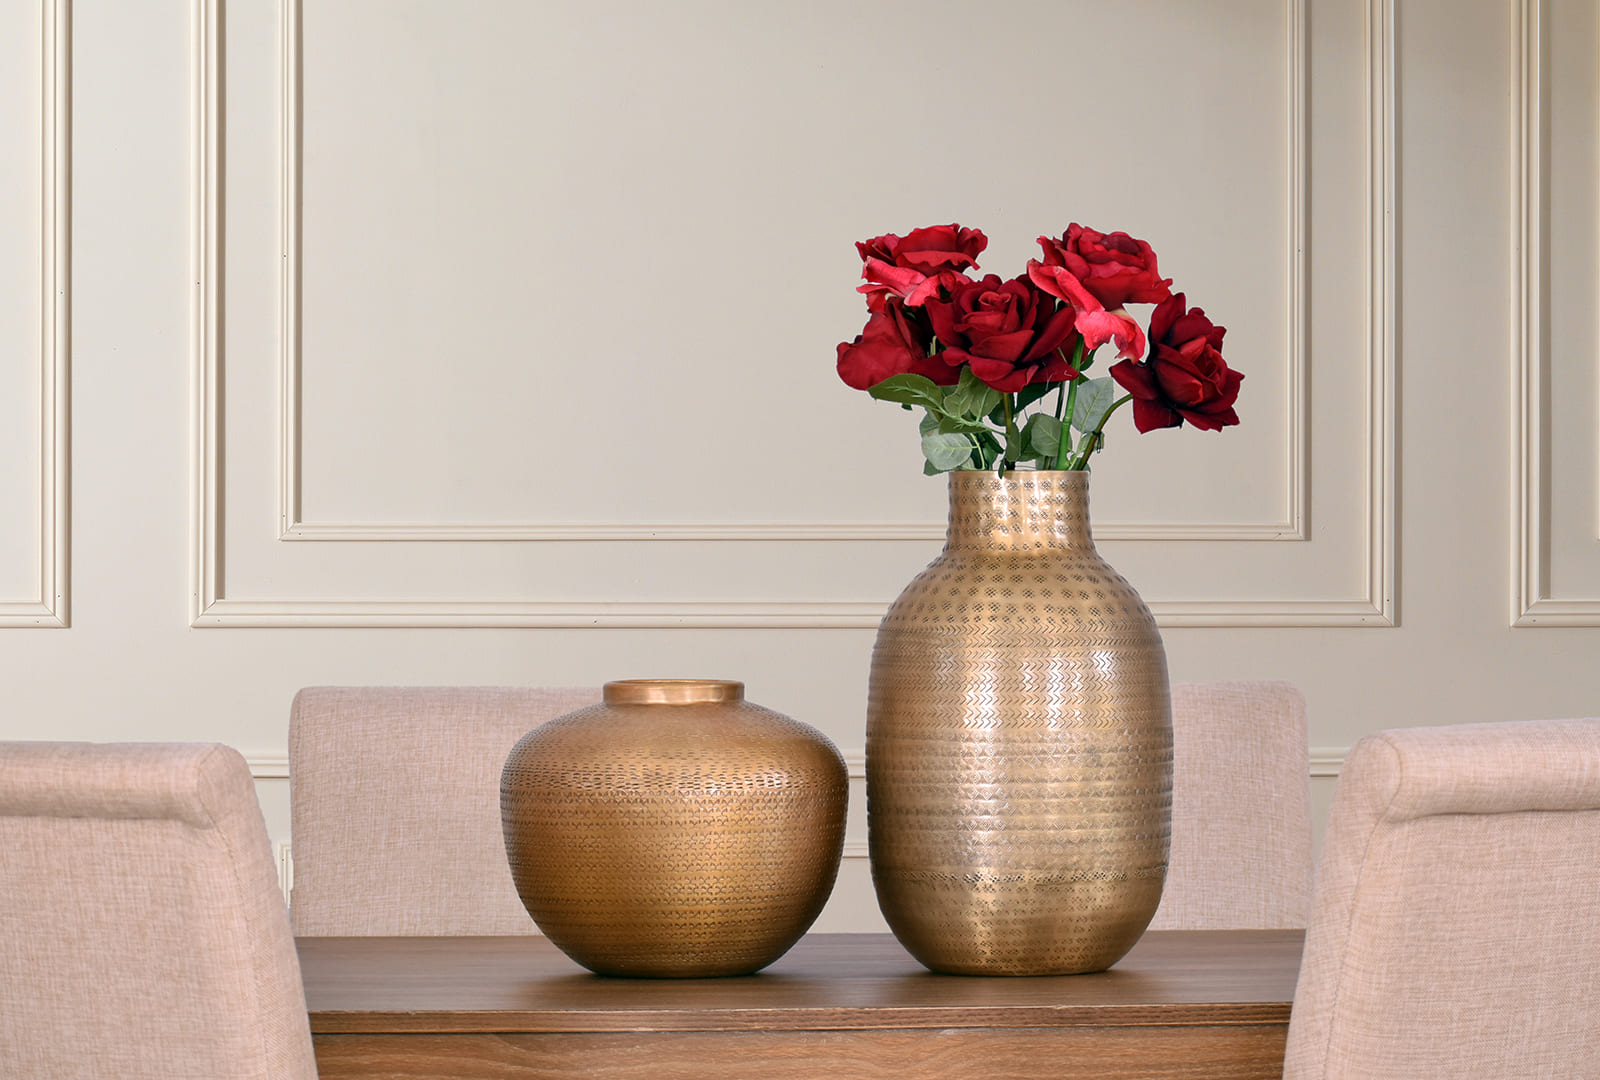 How To Decorate Your Home For A Romantic Valentine’s Day Date!